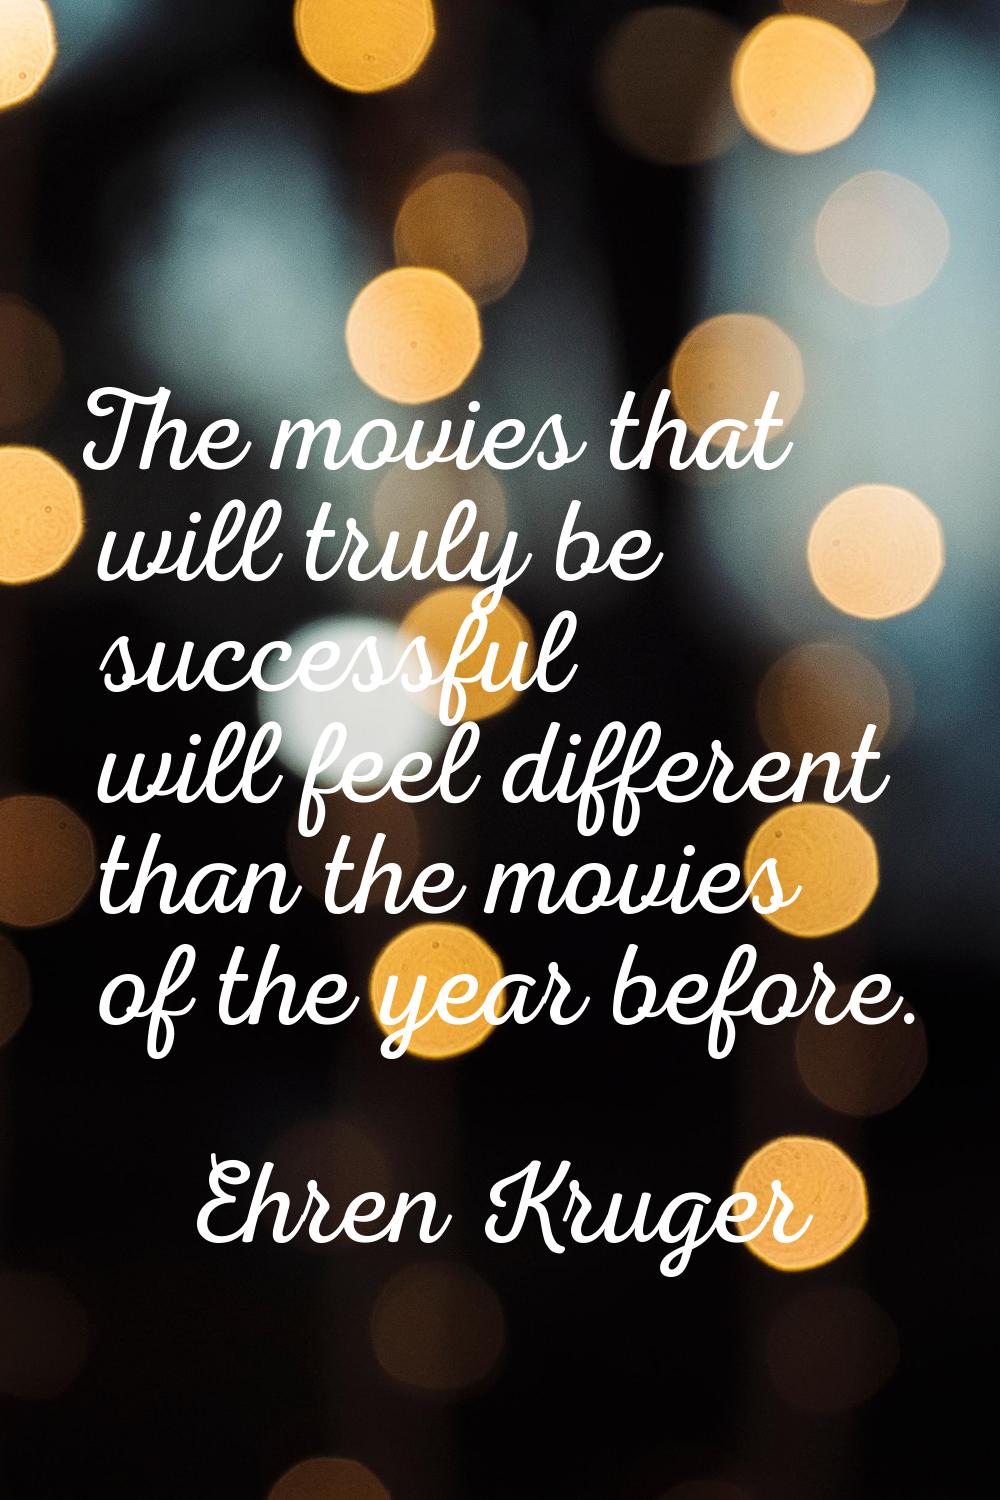 The movies that will truly be successful will feel different than the movies of the year before.